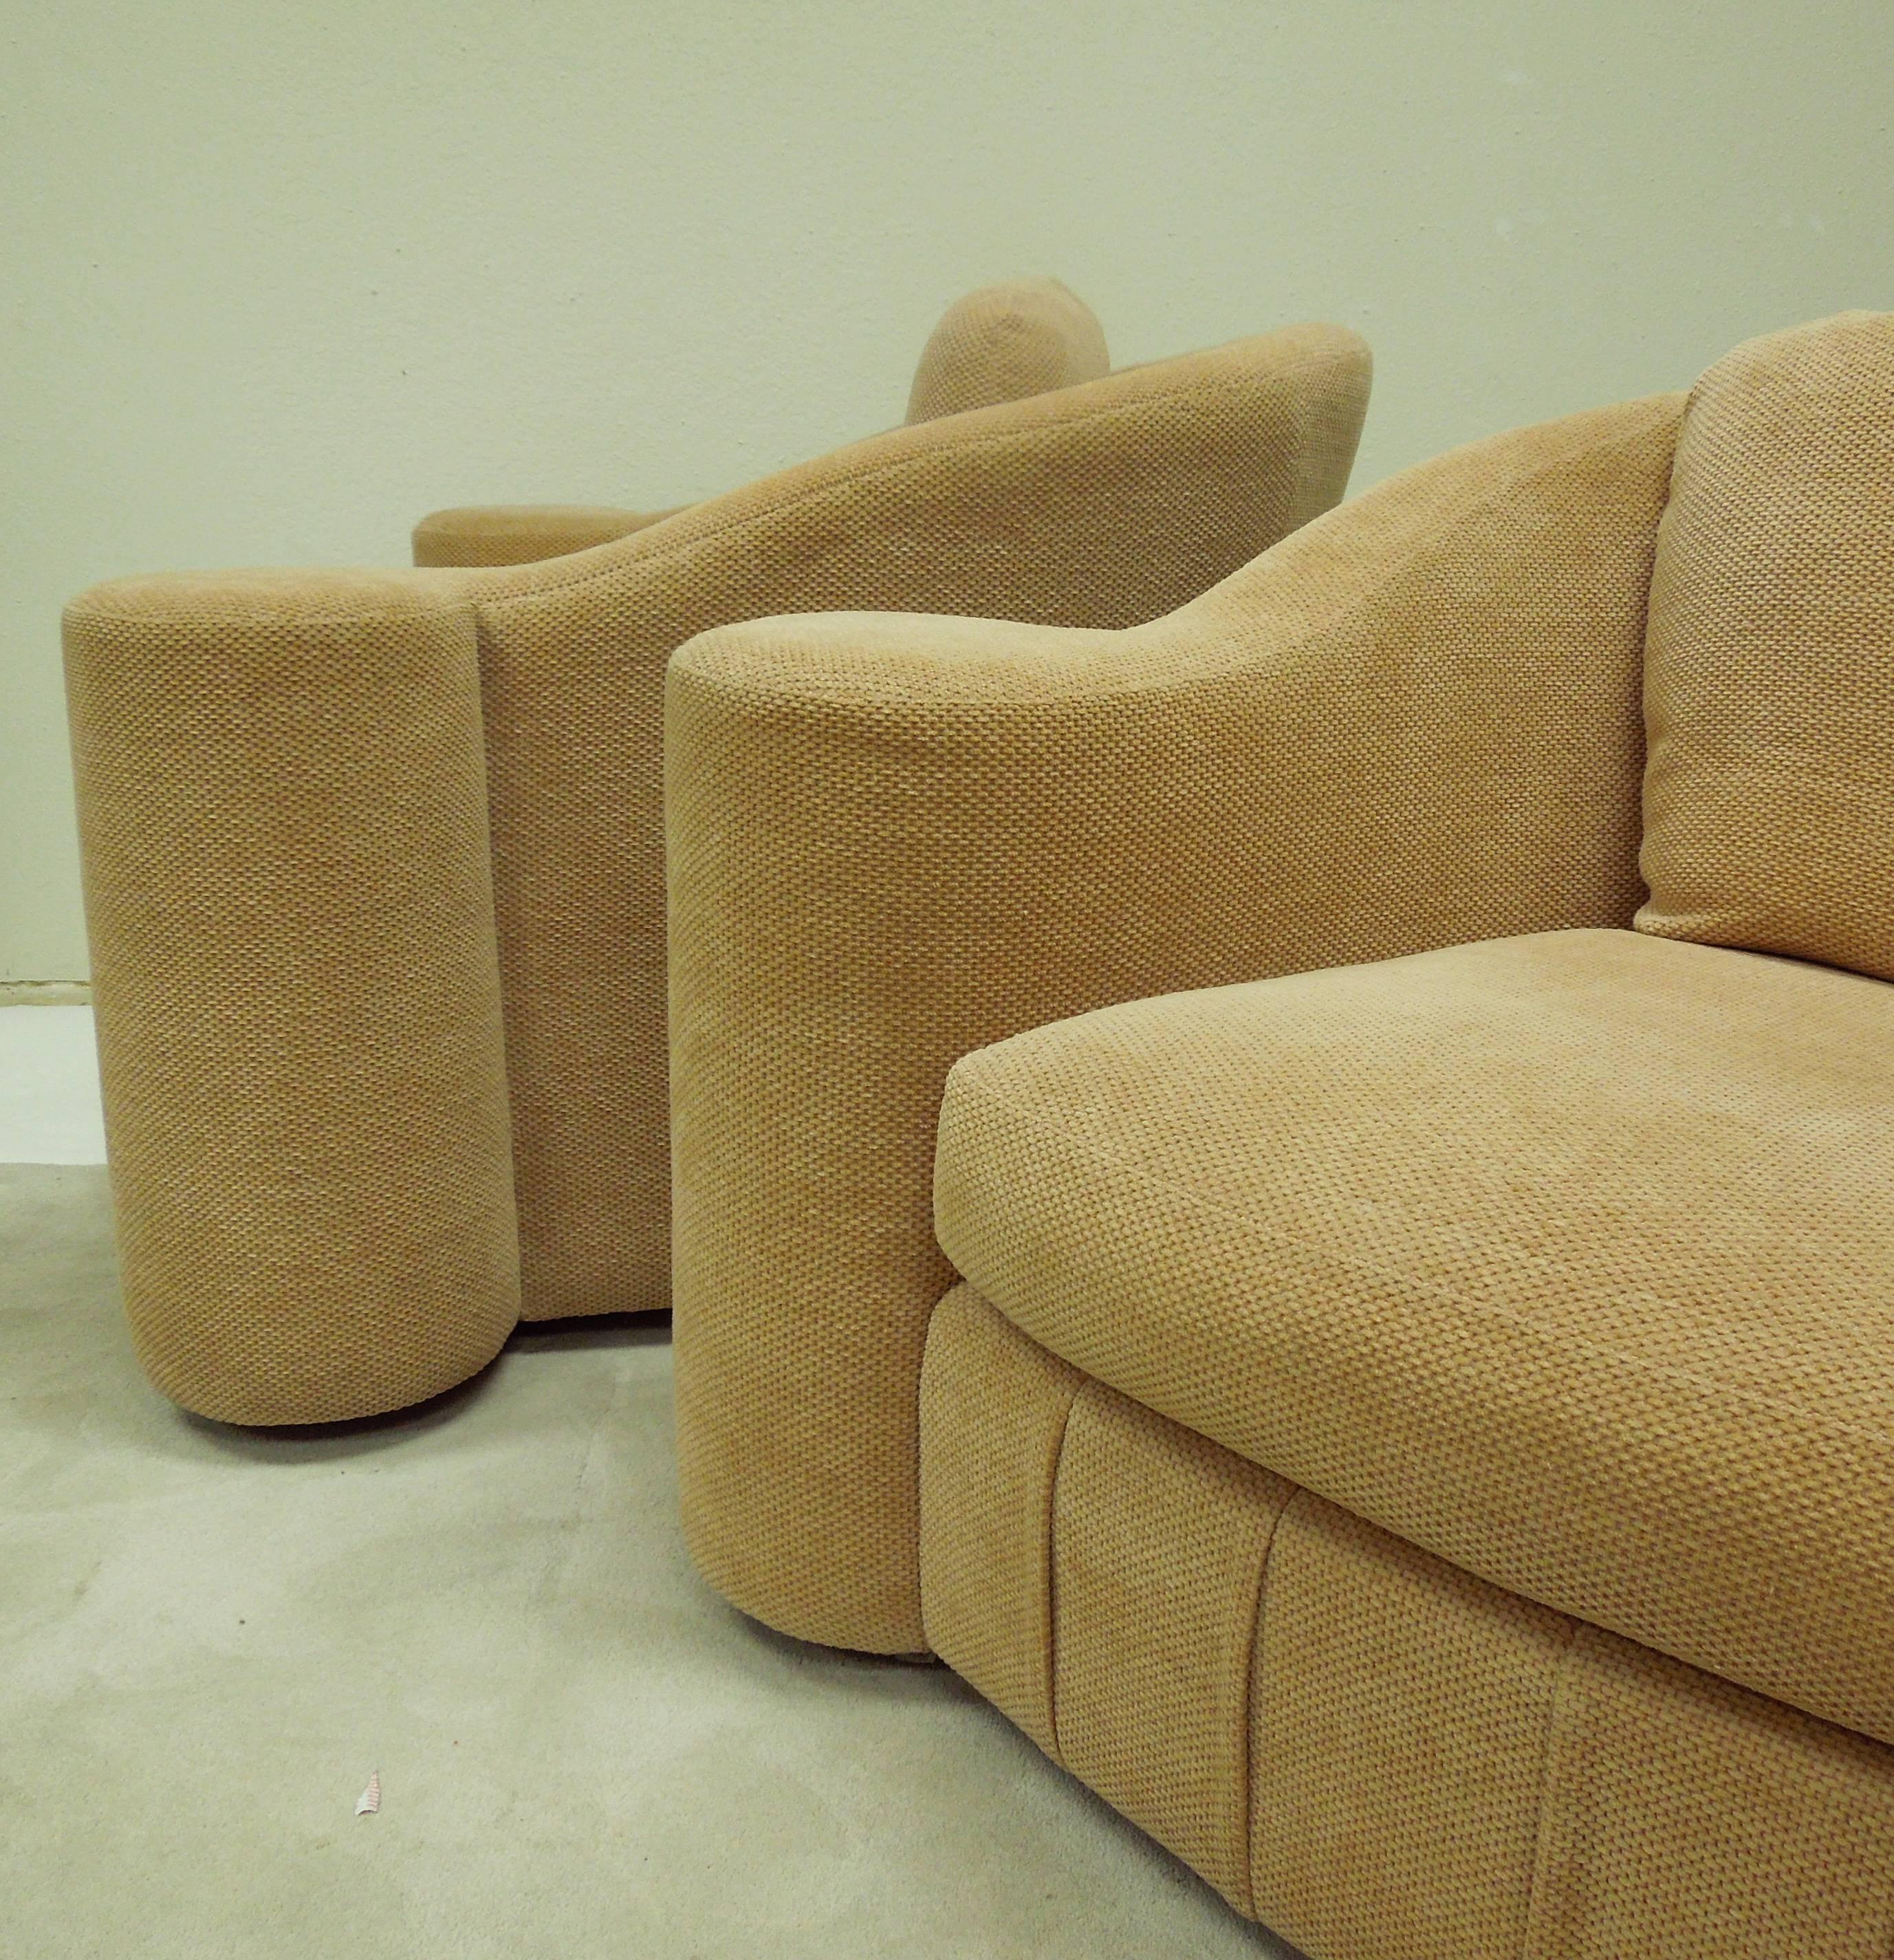 Hand-Crafted Large Pair of 1990s Modern Swivel Chairs from a Steve Chase Estate